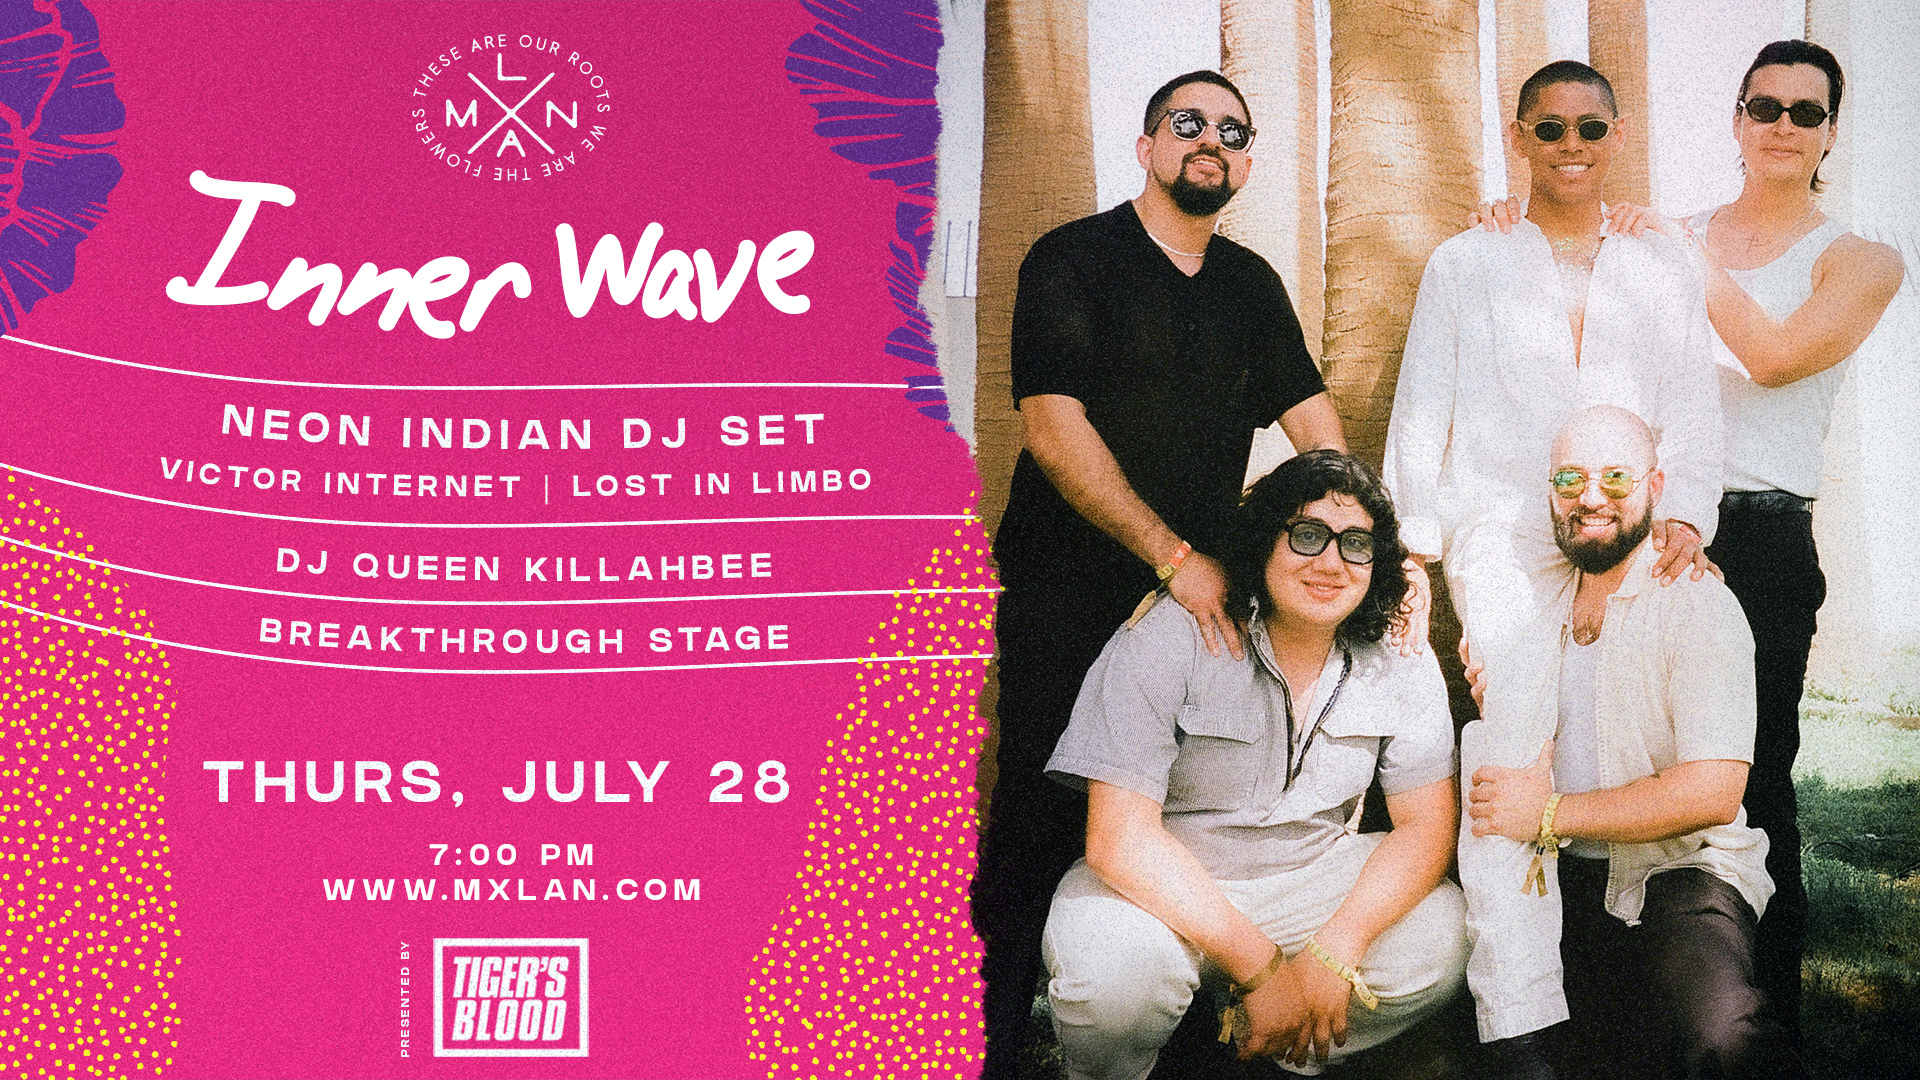 mxlan festival inner wave mcallen latino latinx music arts best fesitval in texas acl south by south west coachella rio grande valley south padre island brownsville indie best latino festival in us breakthrough stage